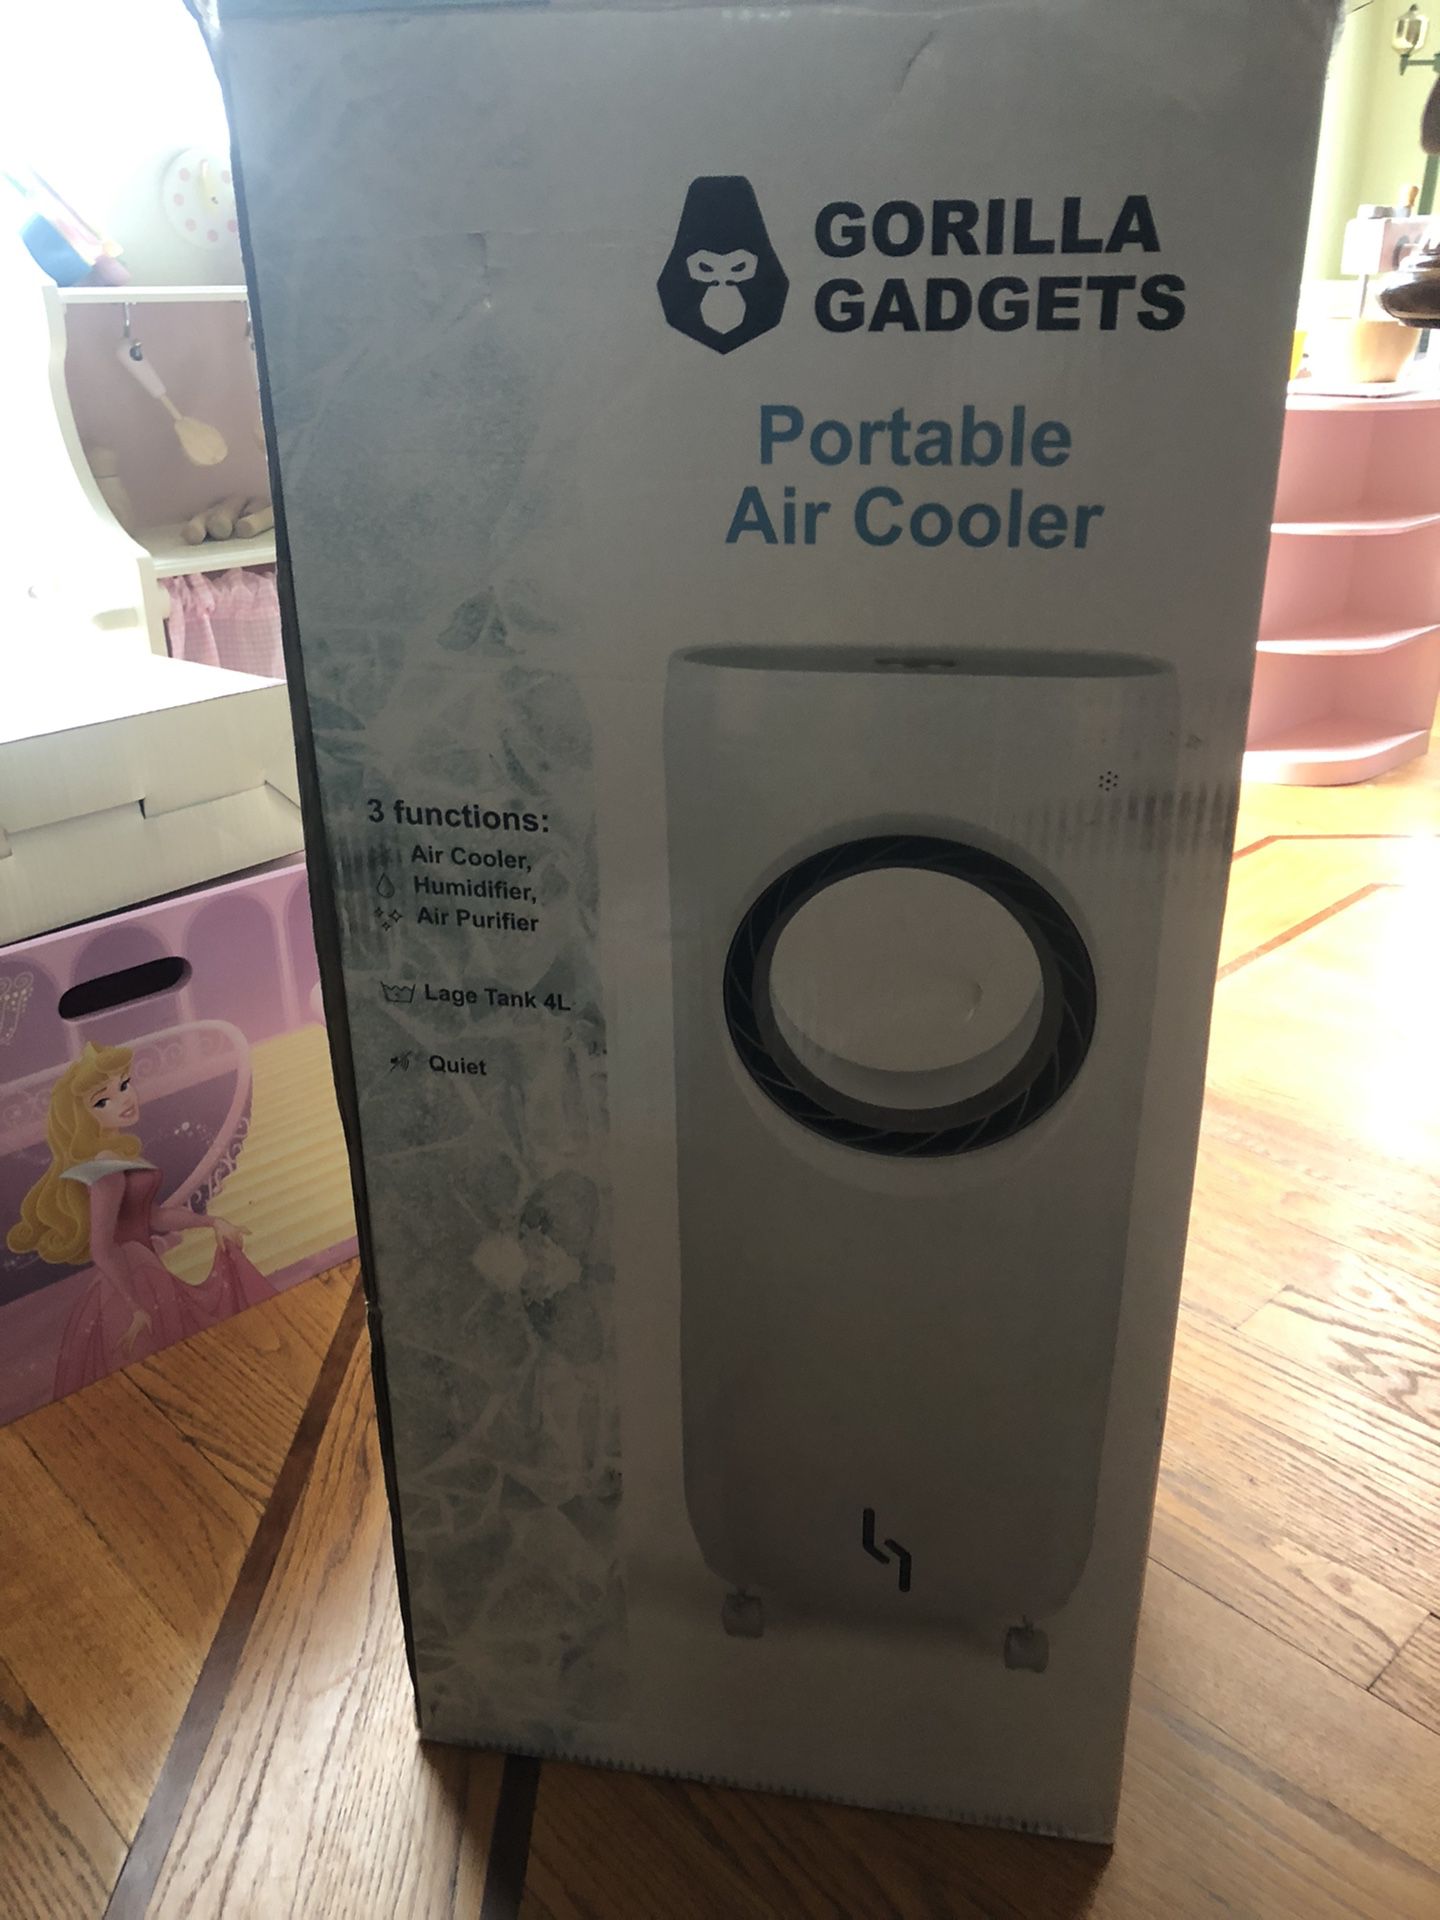 Gorilla Gadgets Portable Air Cooler for Sale in East Moriches, NY - OfferUp